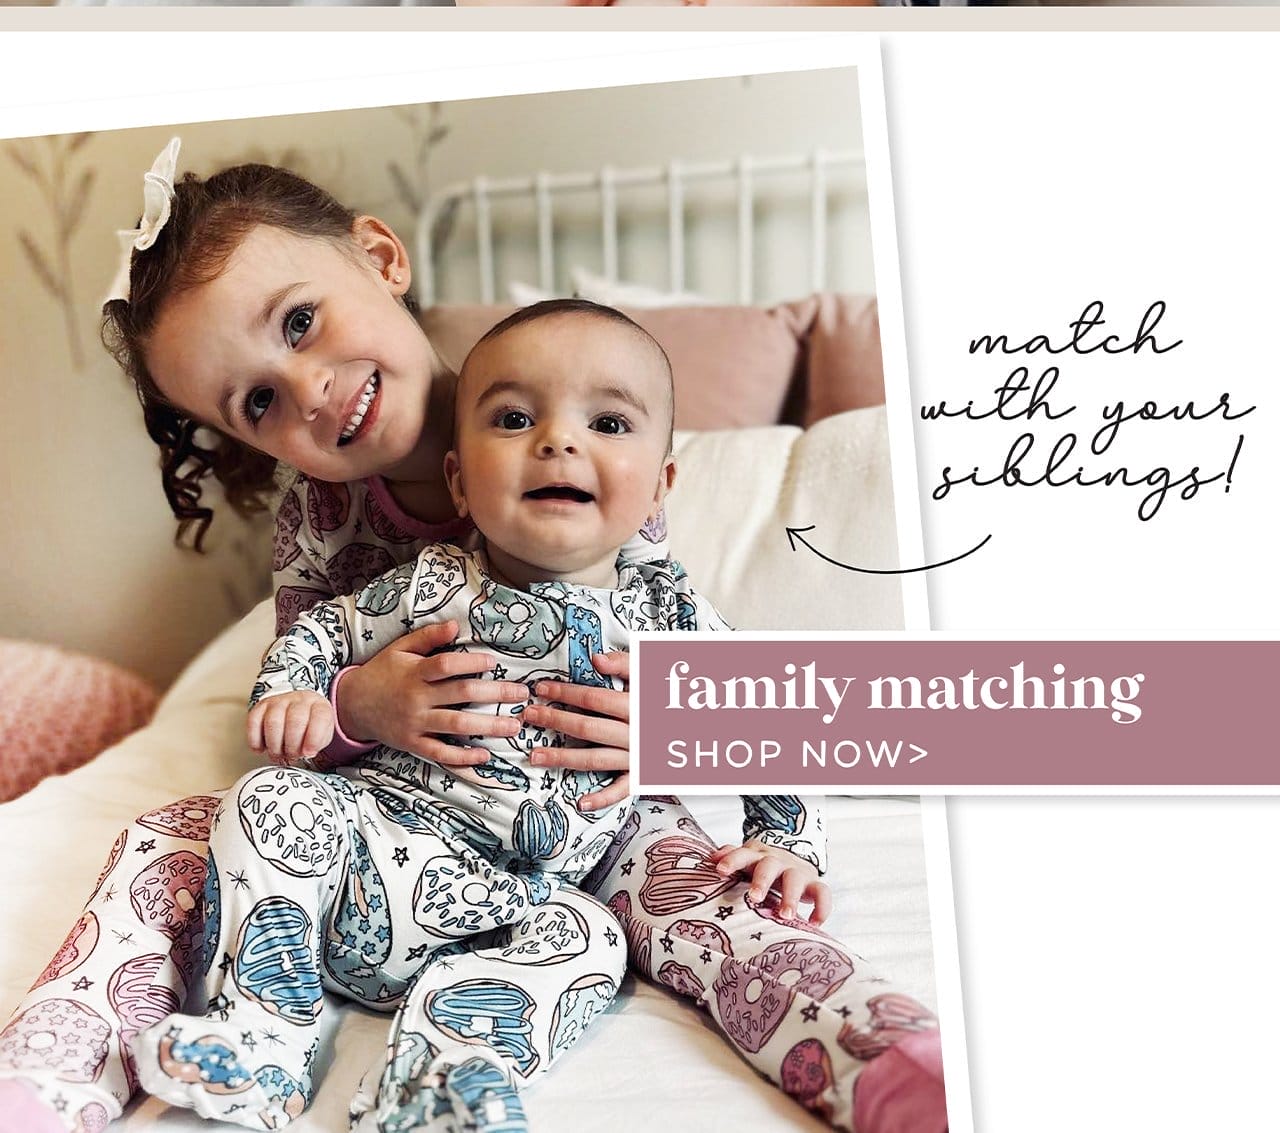 match with your siblings! | family matching | SHOP NOW